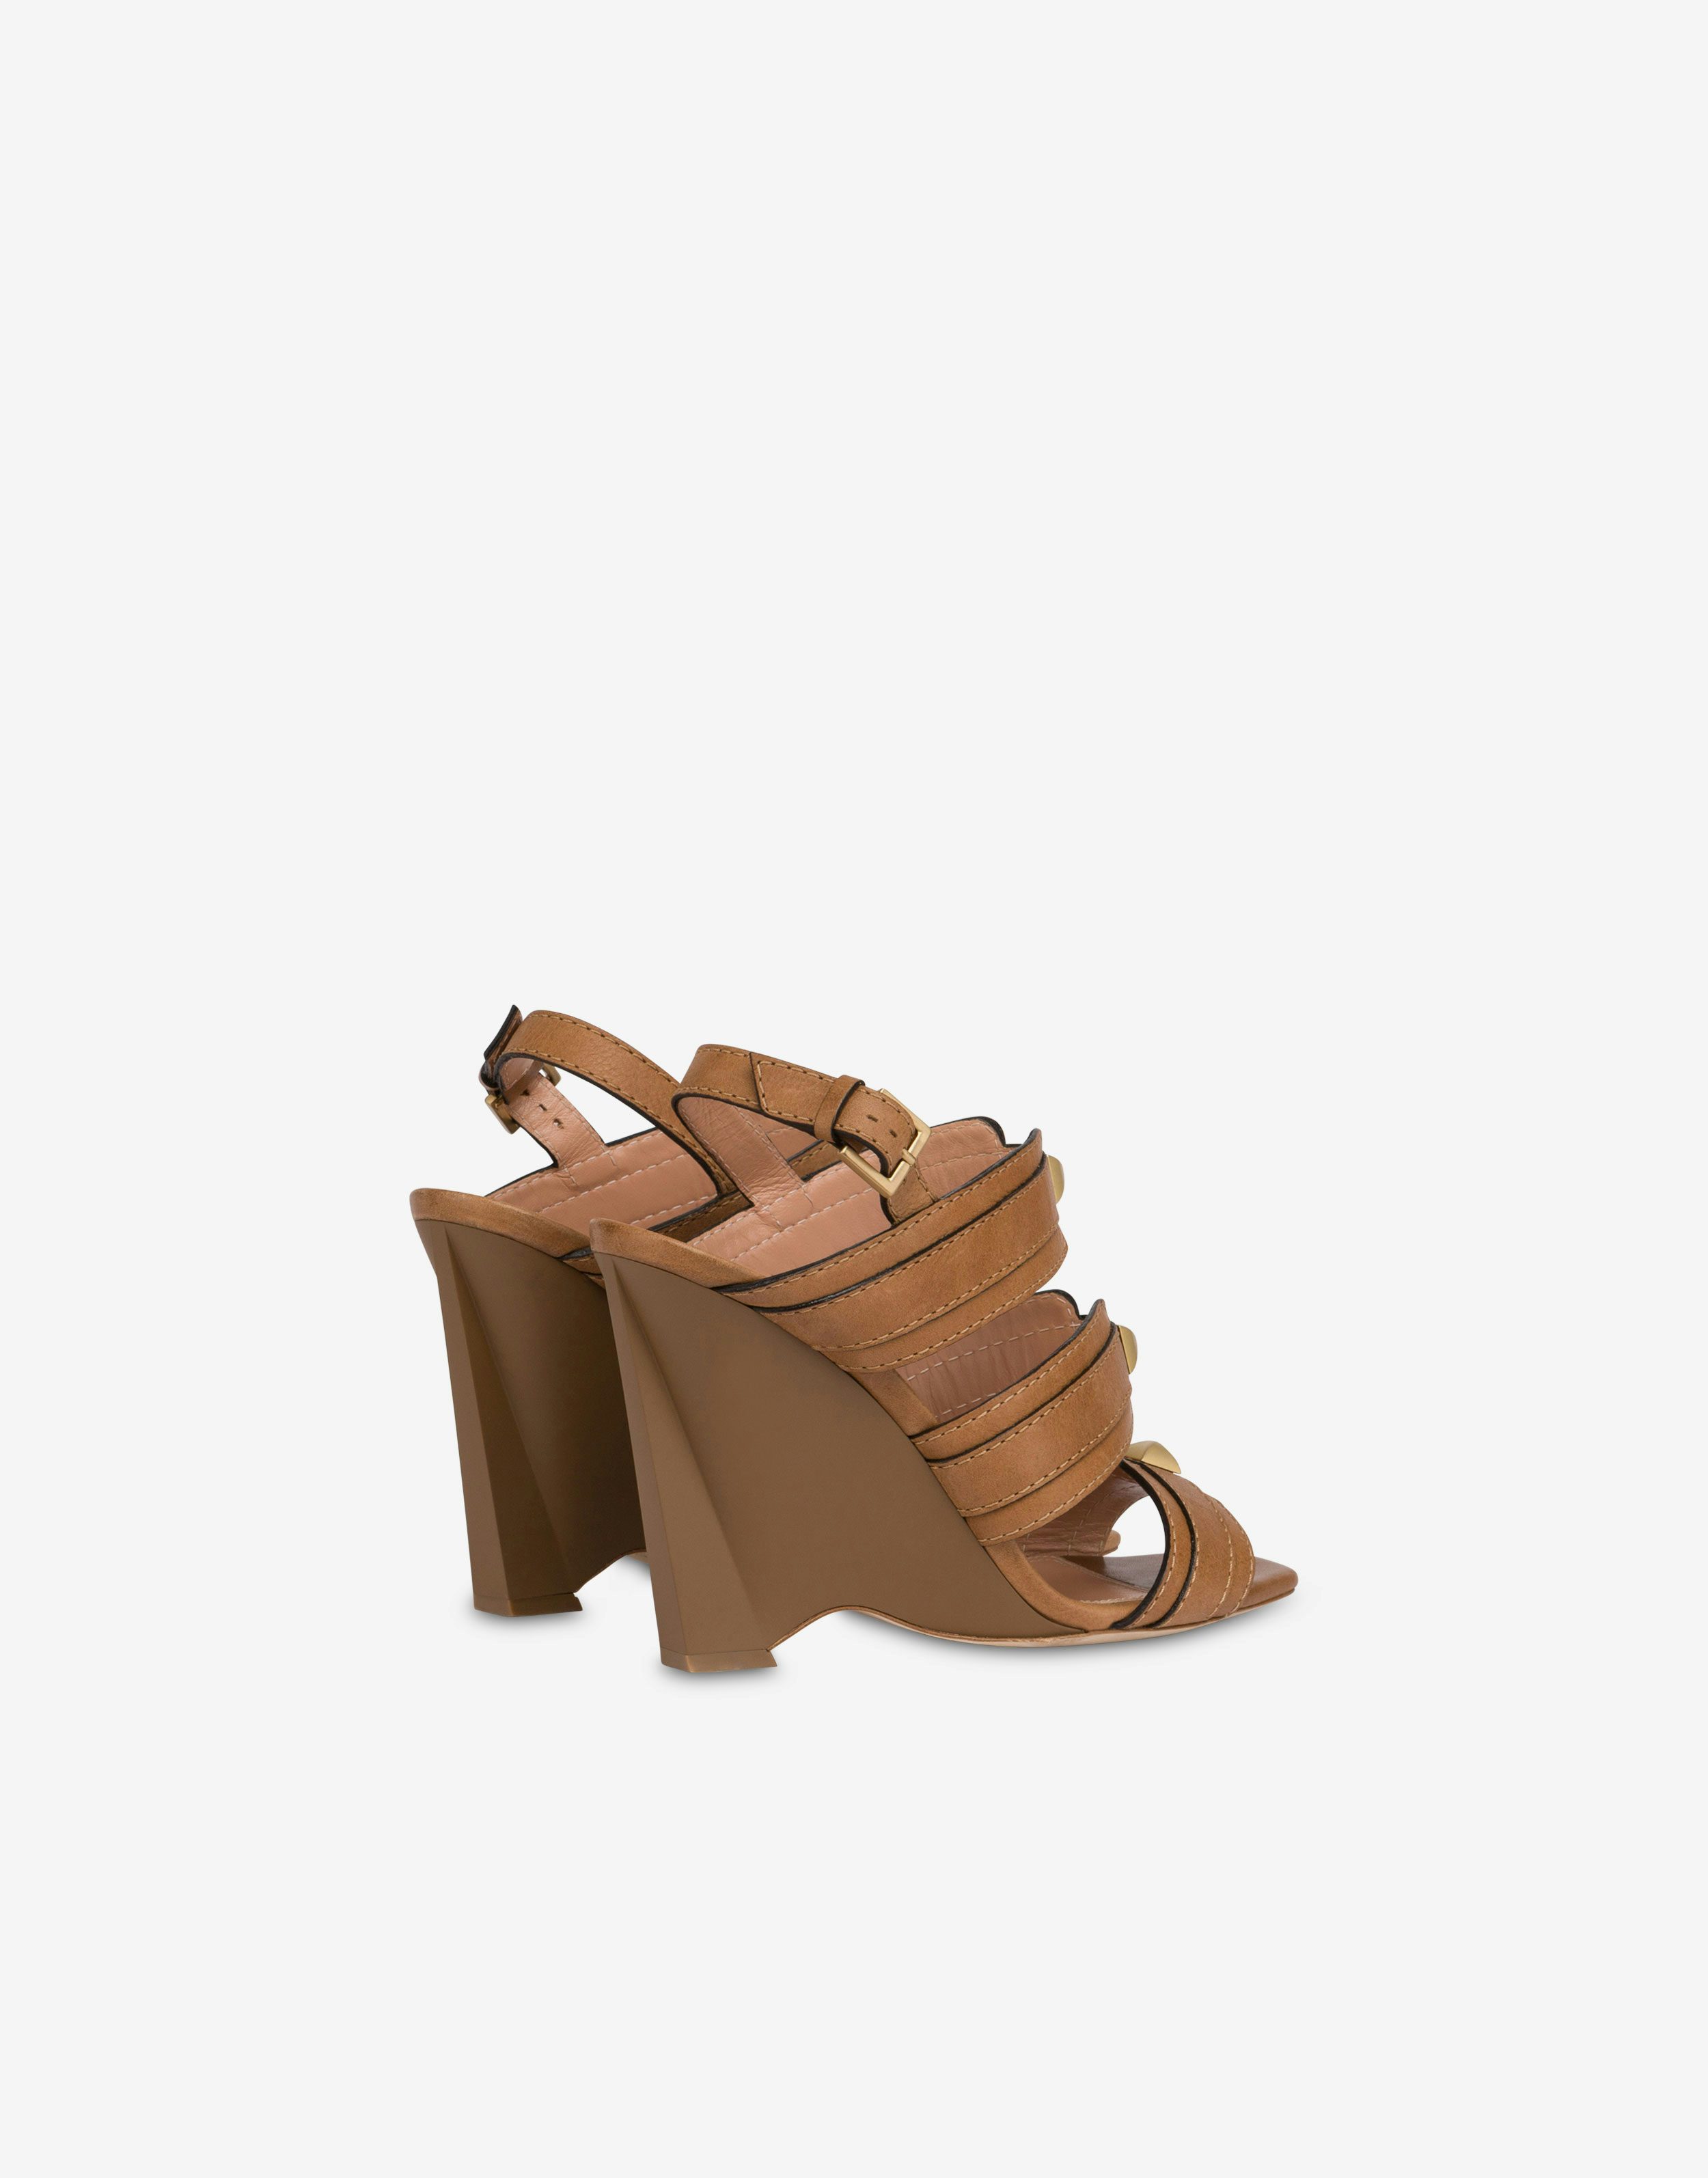 Cage nappa calfskin wedge sandals